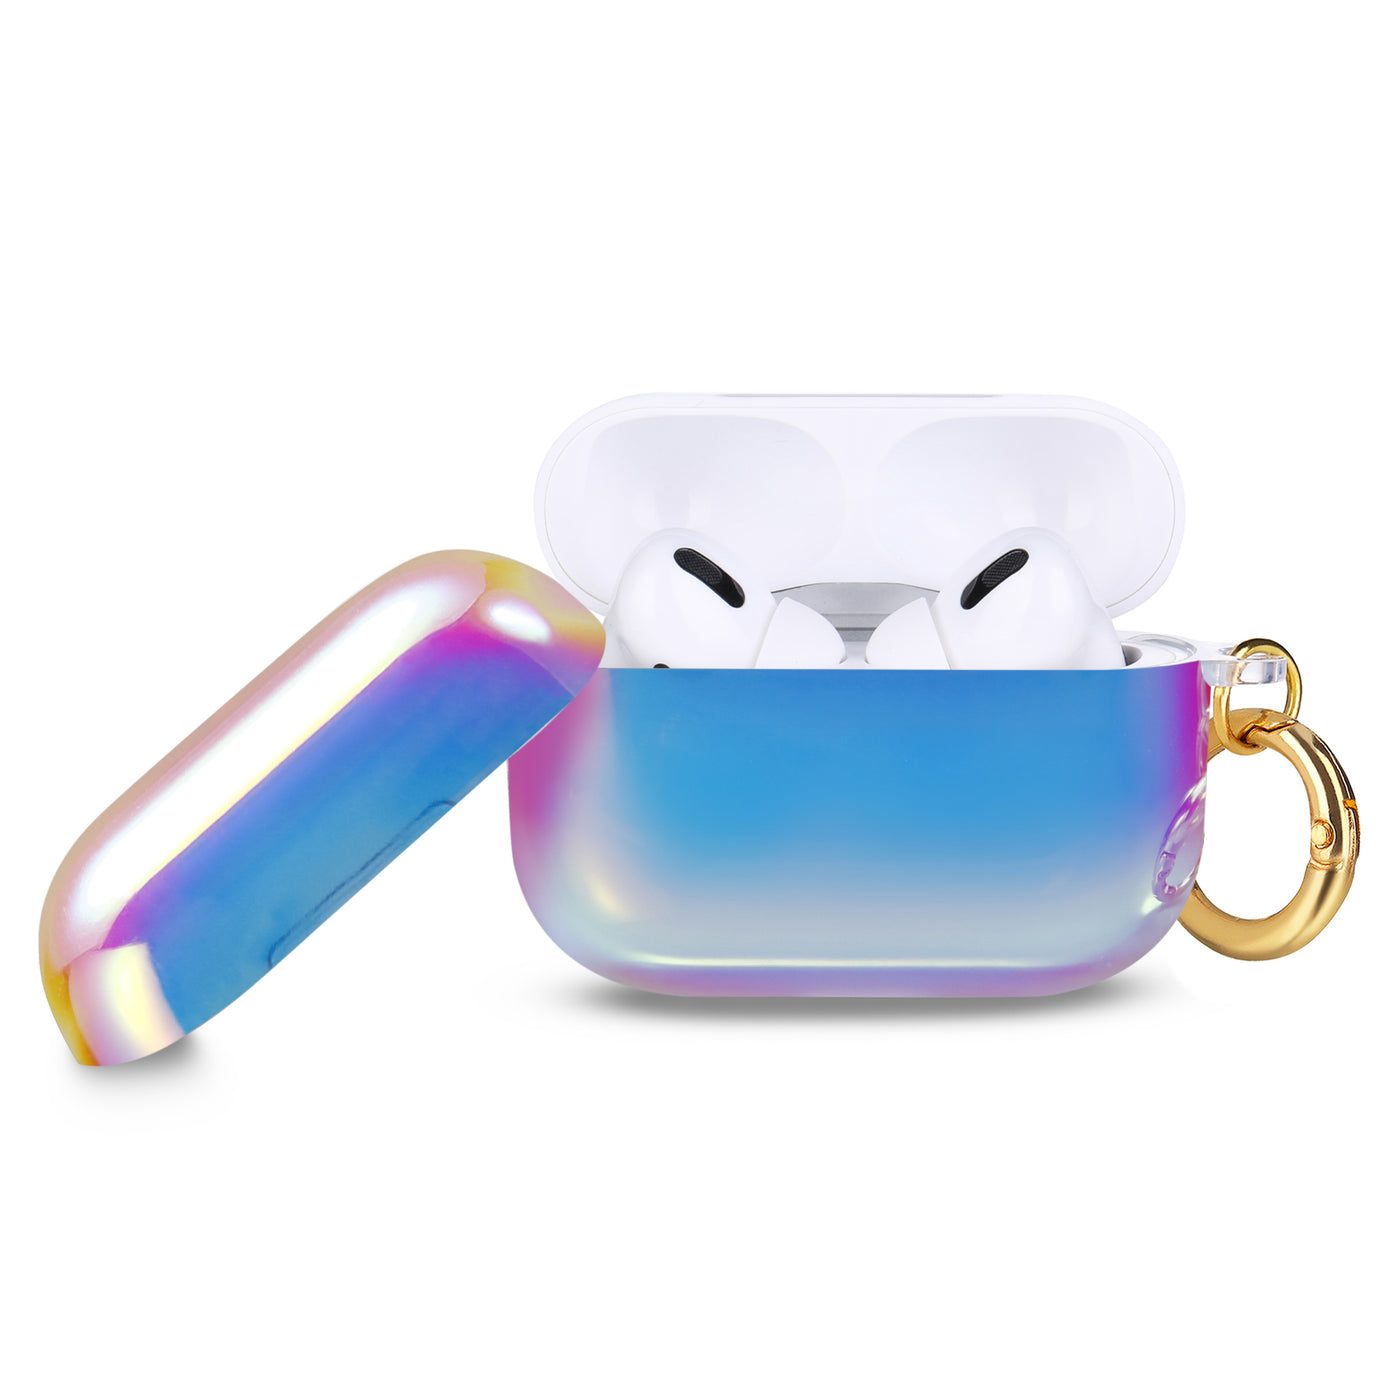 Two piece design Aura holographic airpods pro case